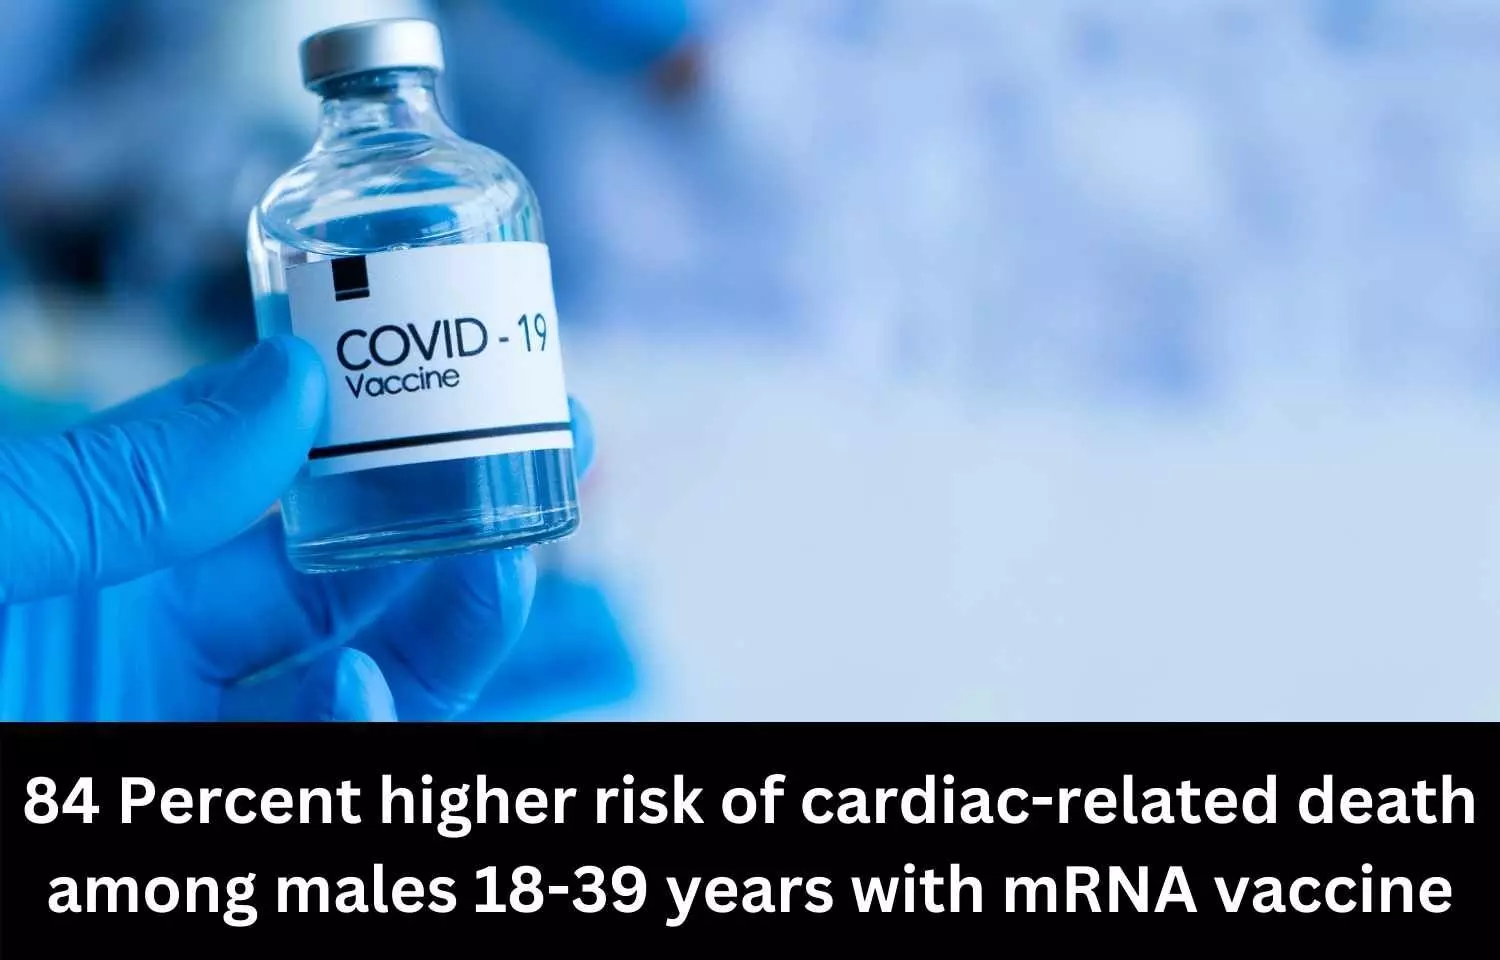 84 Percent higher risk of cardiac-related death among males 18-39 years with MRNA vaccine: Analysis sparks fear against Pfizer, Moderna vaccine